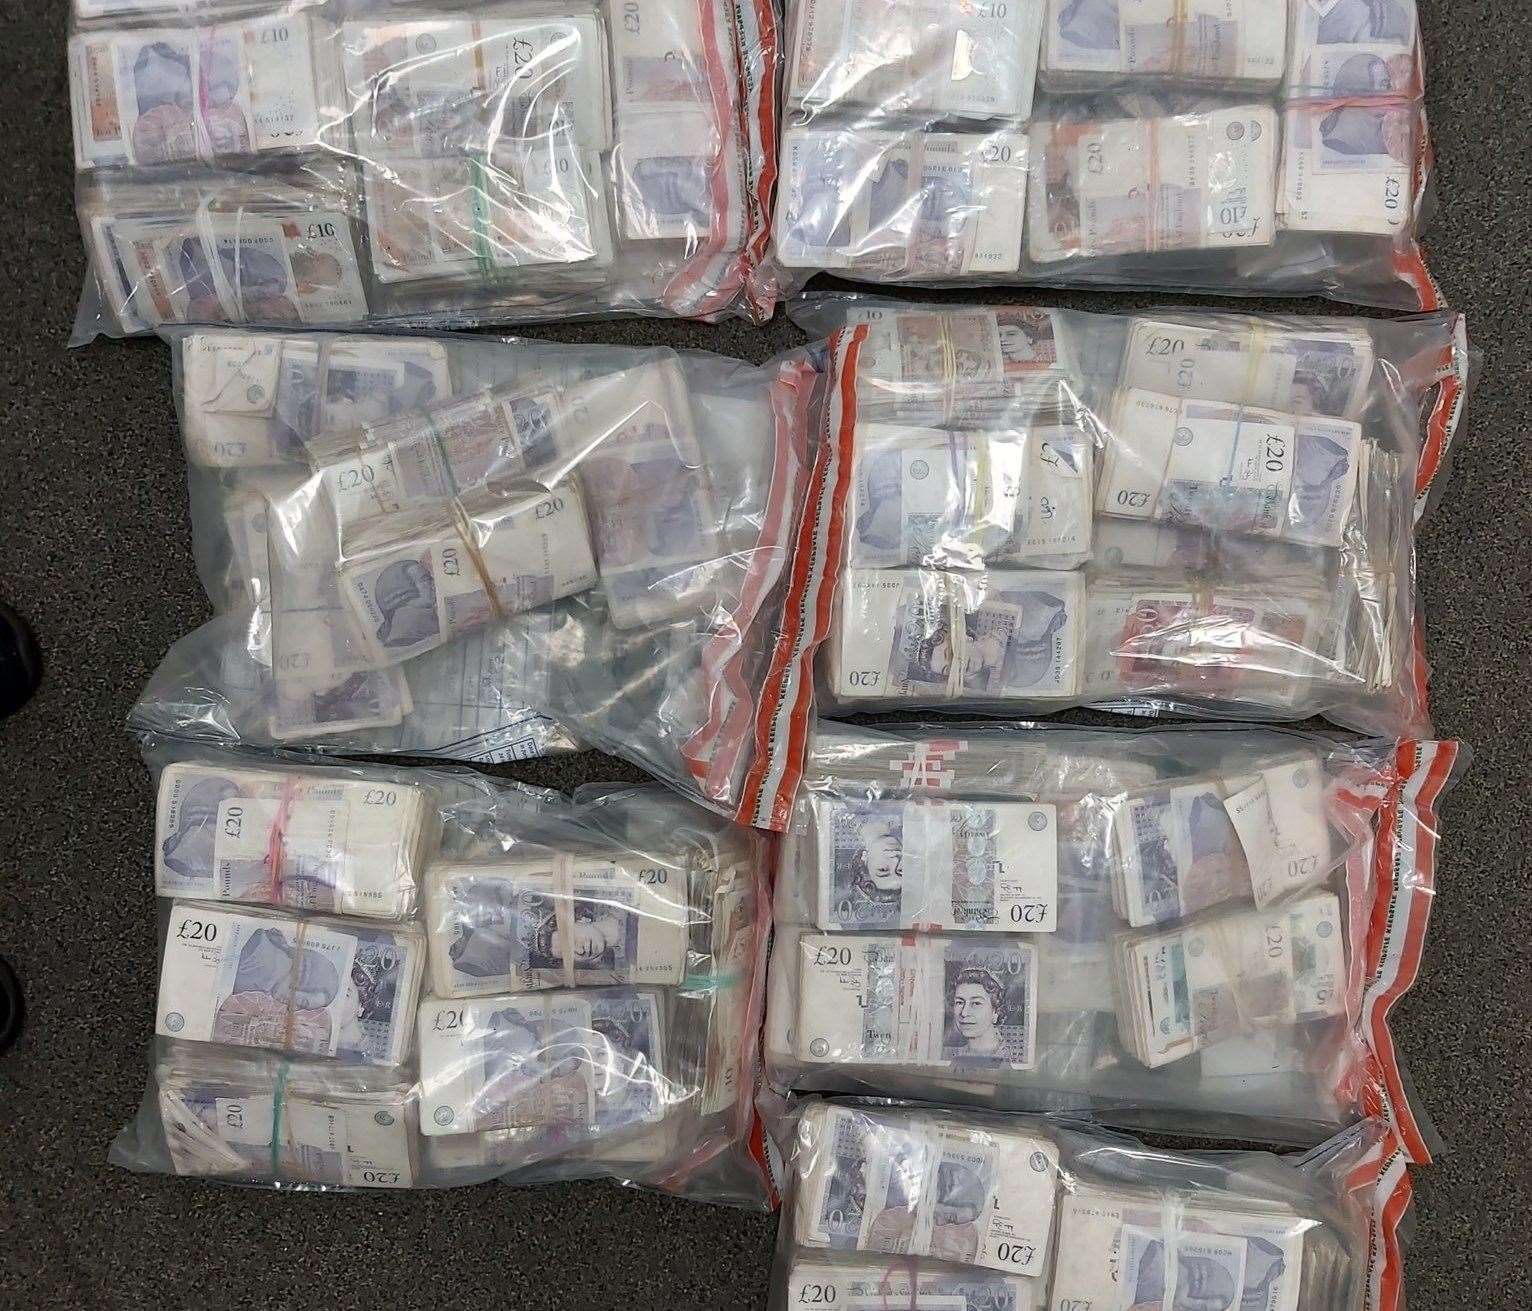 A large quantity of cash was recovered. Picture: Kent Police - Dover, Twitter account